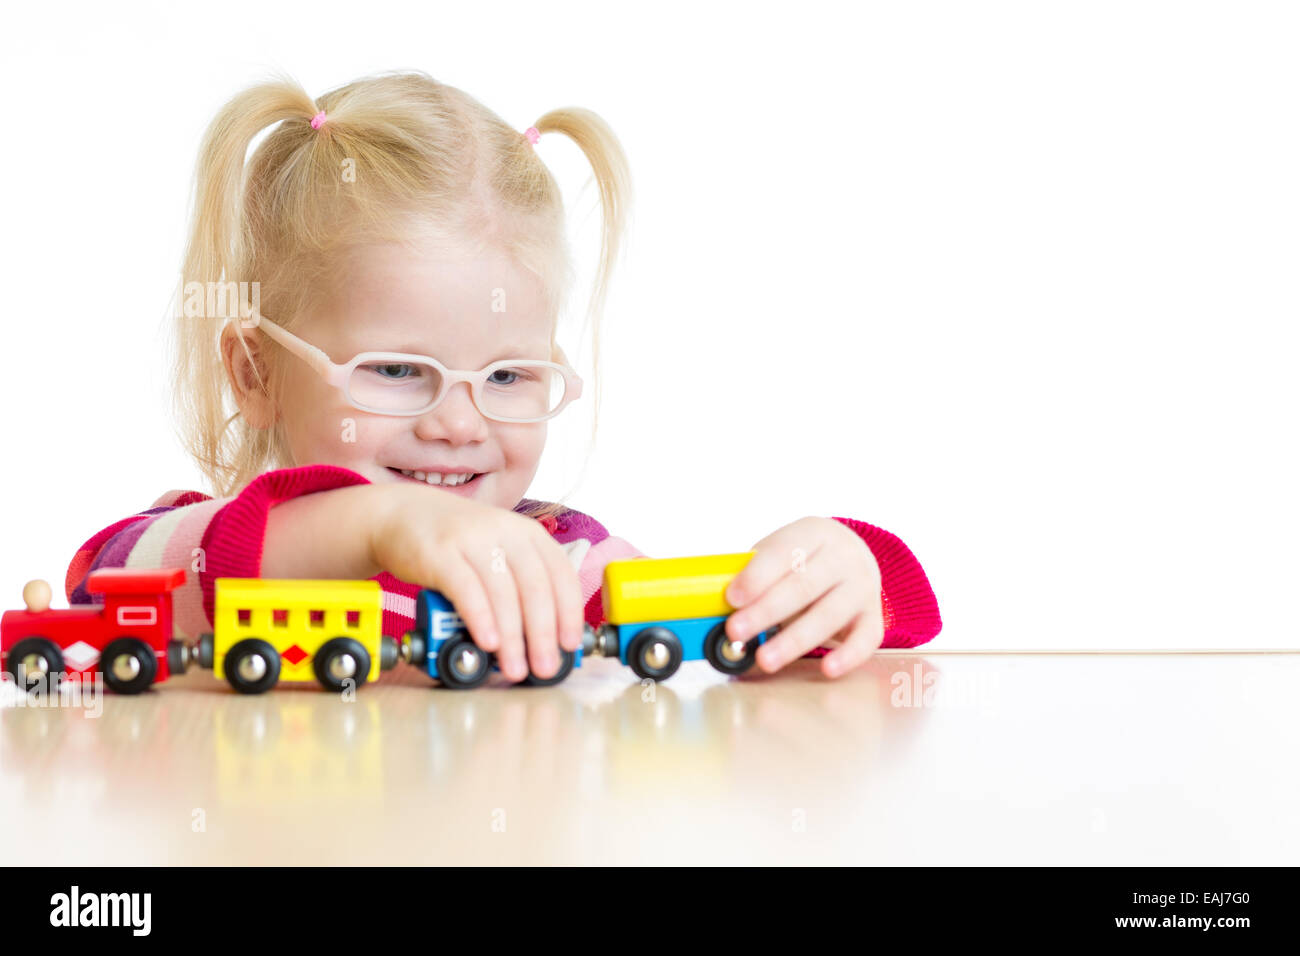 Child in eyeglasses playing toy train isolated Stock Photo